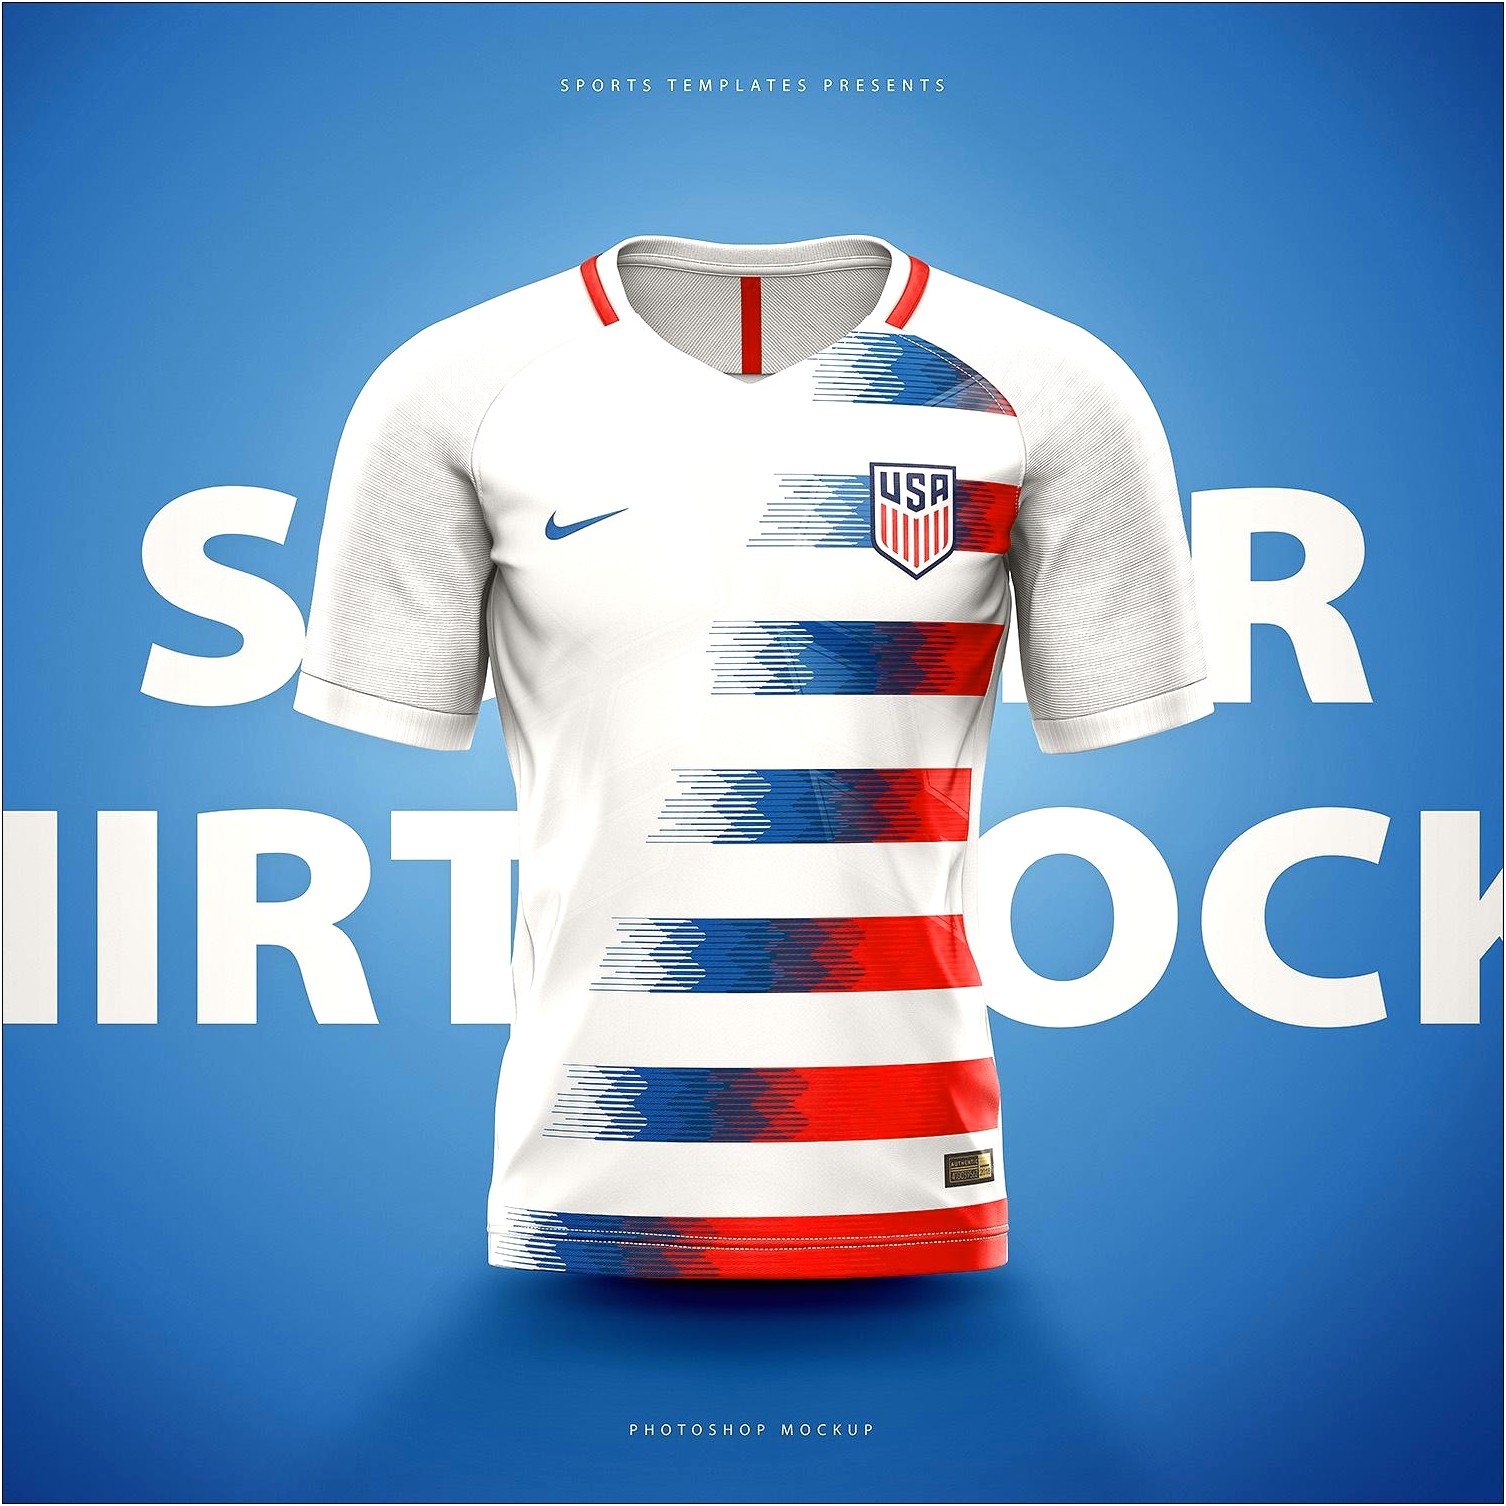 Football Jersey Template Psd Free Download